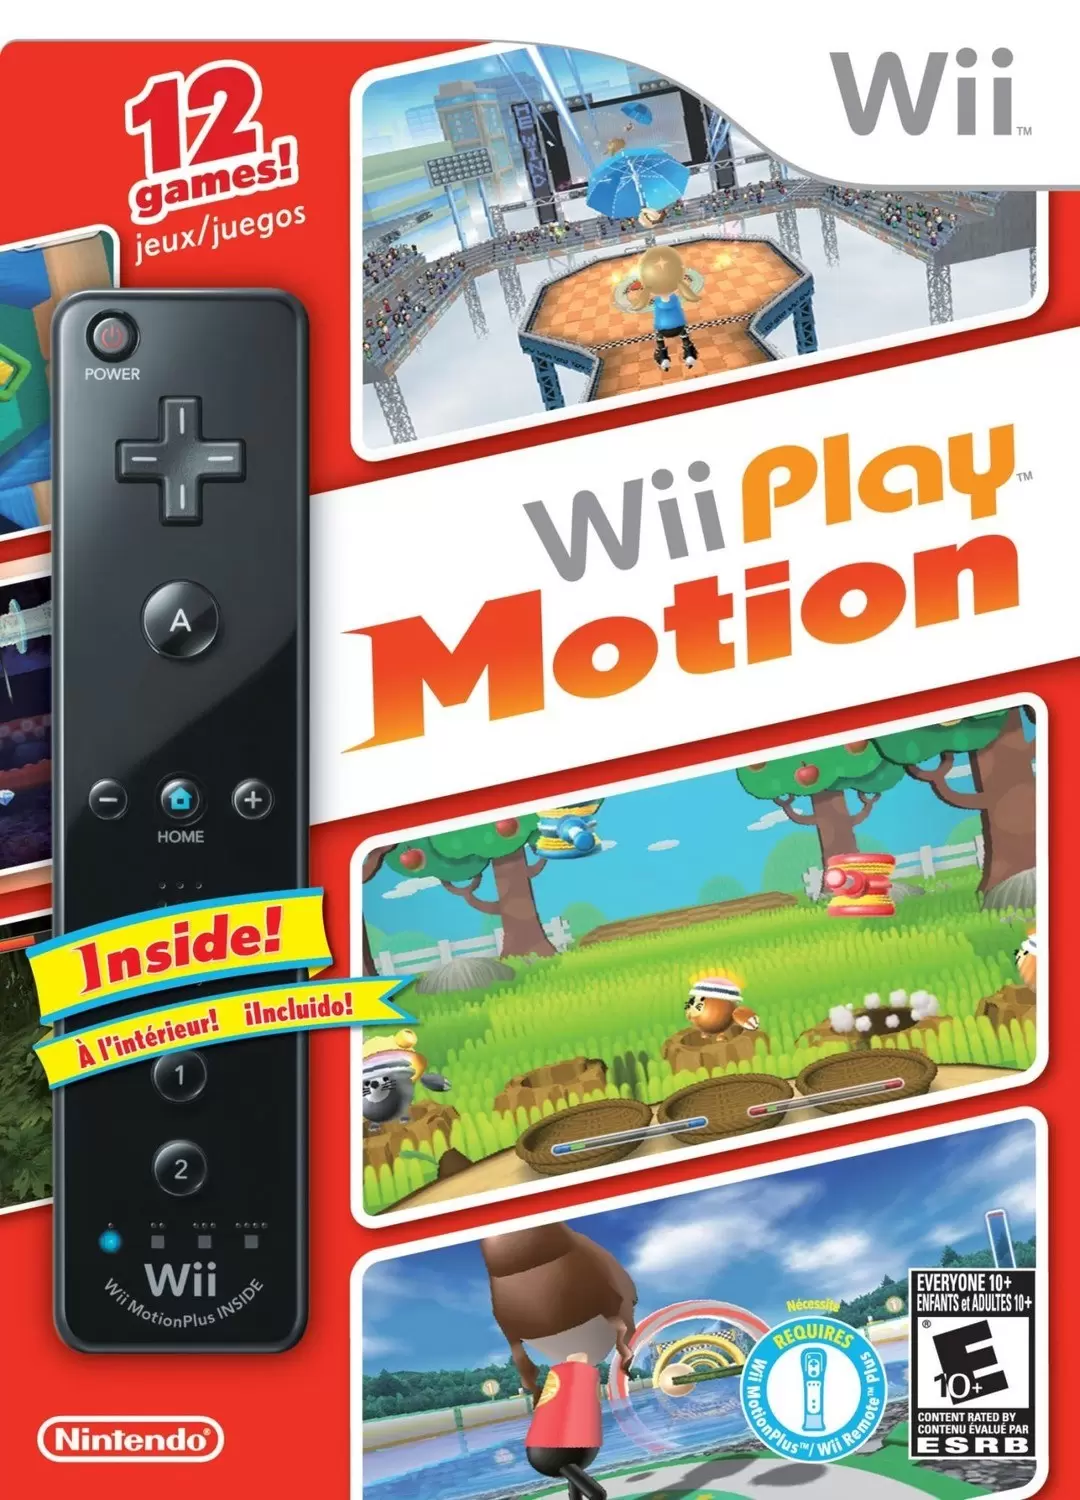 Jeux Nintendo Wii - Wii Play: Motion